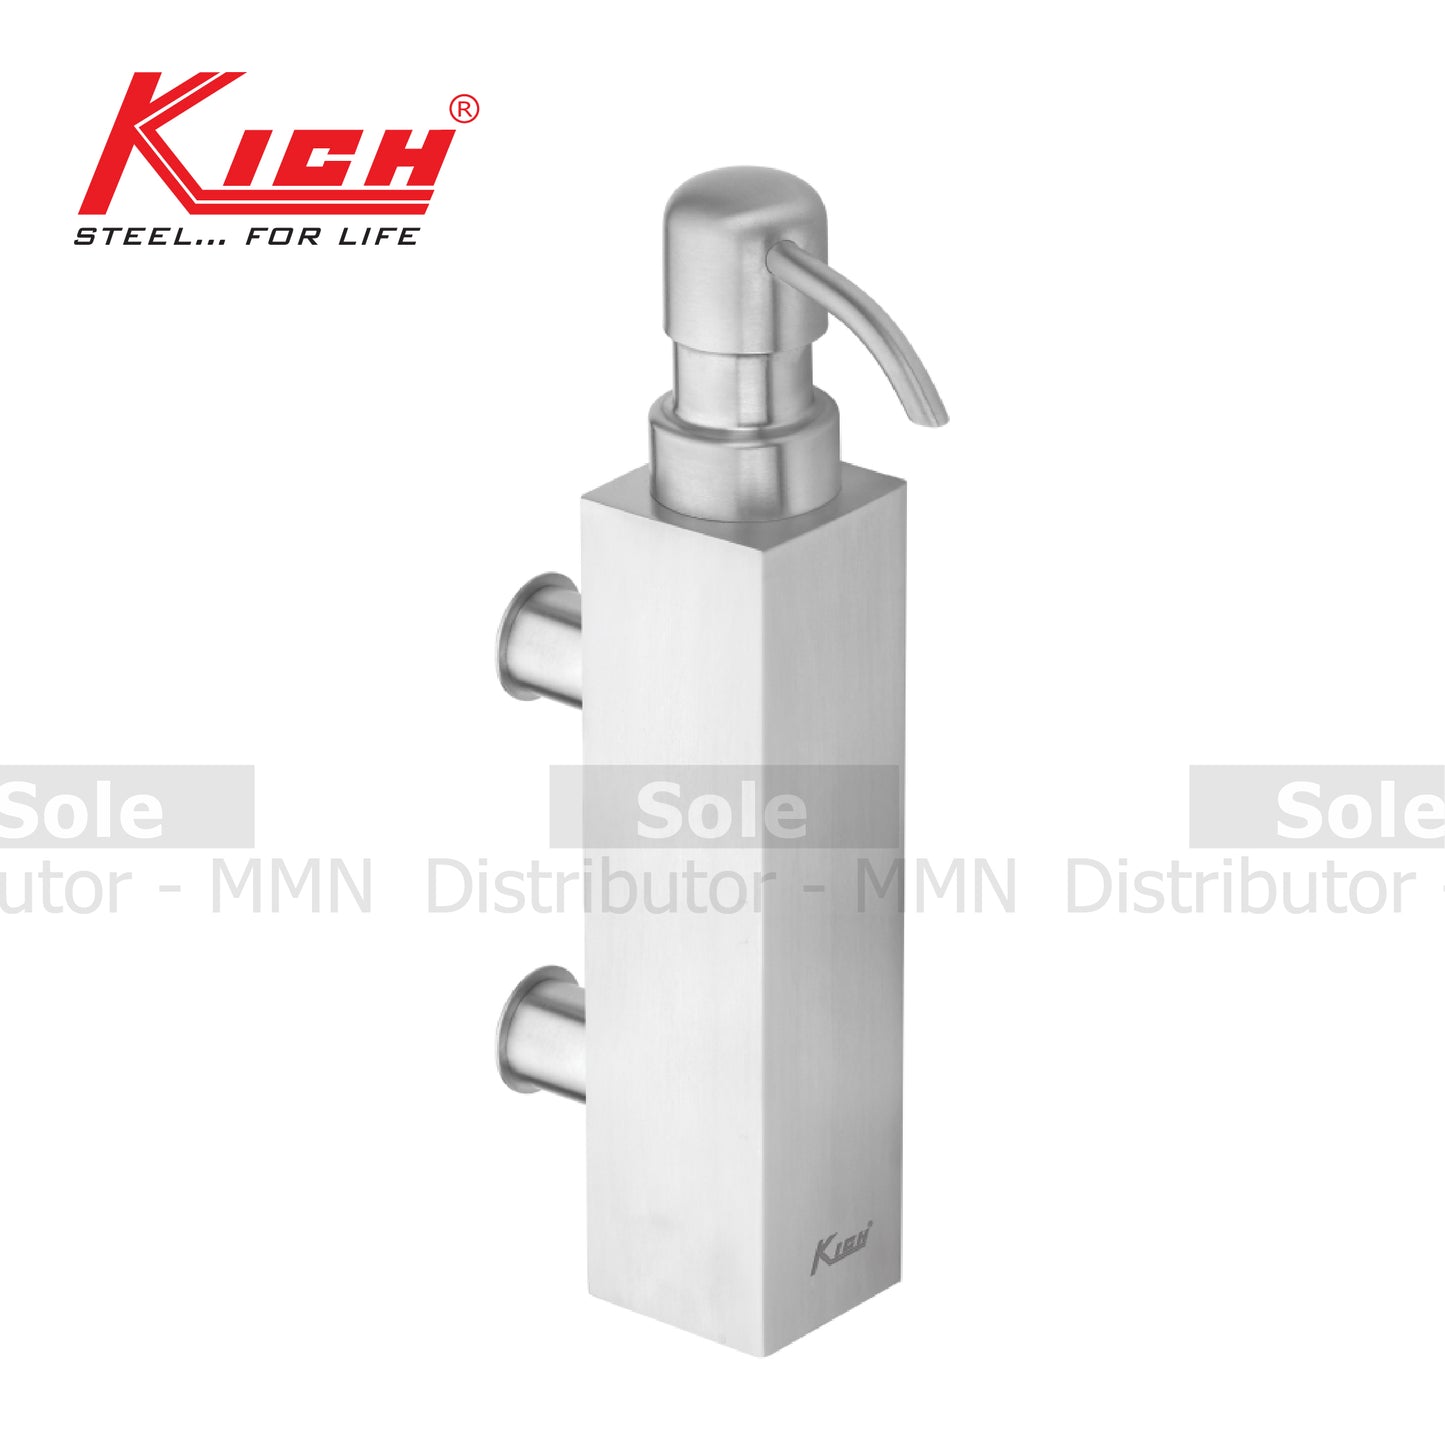 Kich Wall Mounted Square Shape Liquid Soap Dispenser Wall Mounted, Capacity 200ml, Stainless Steel 316 Grade- TLSD7WMS